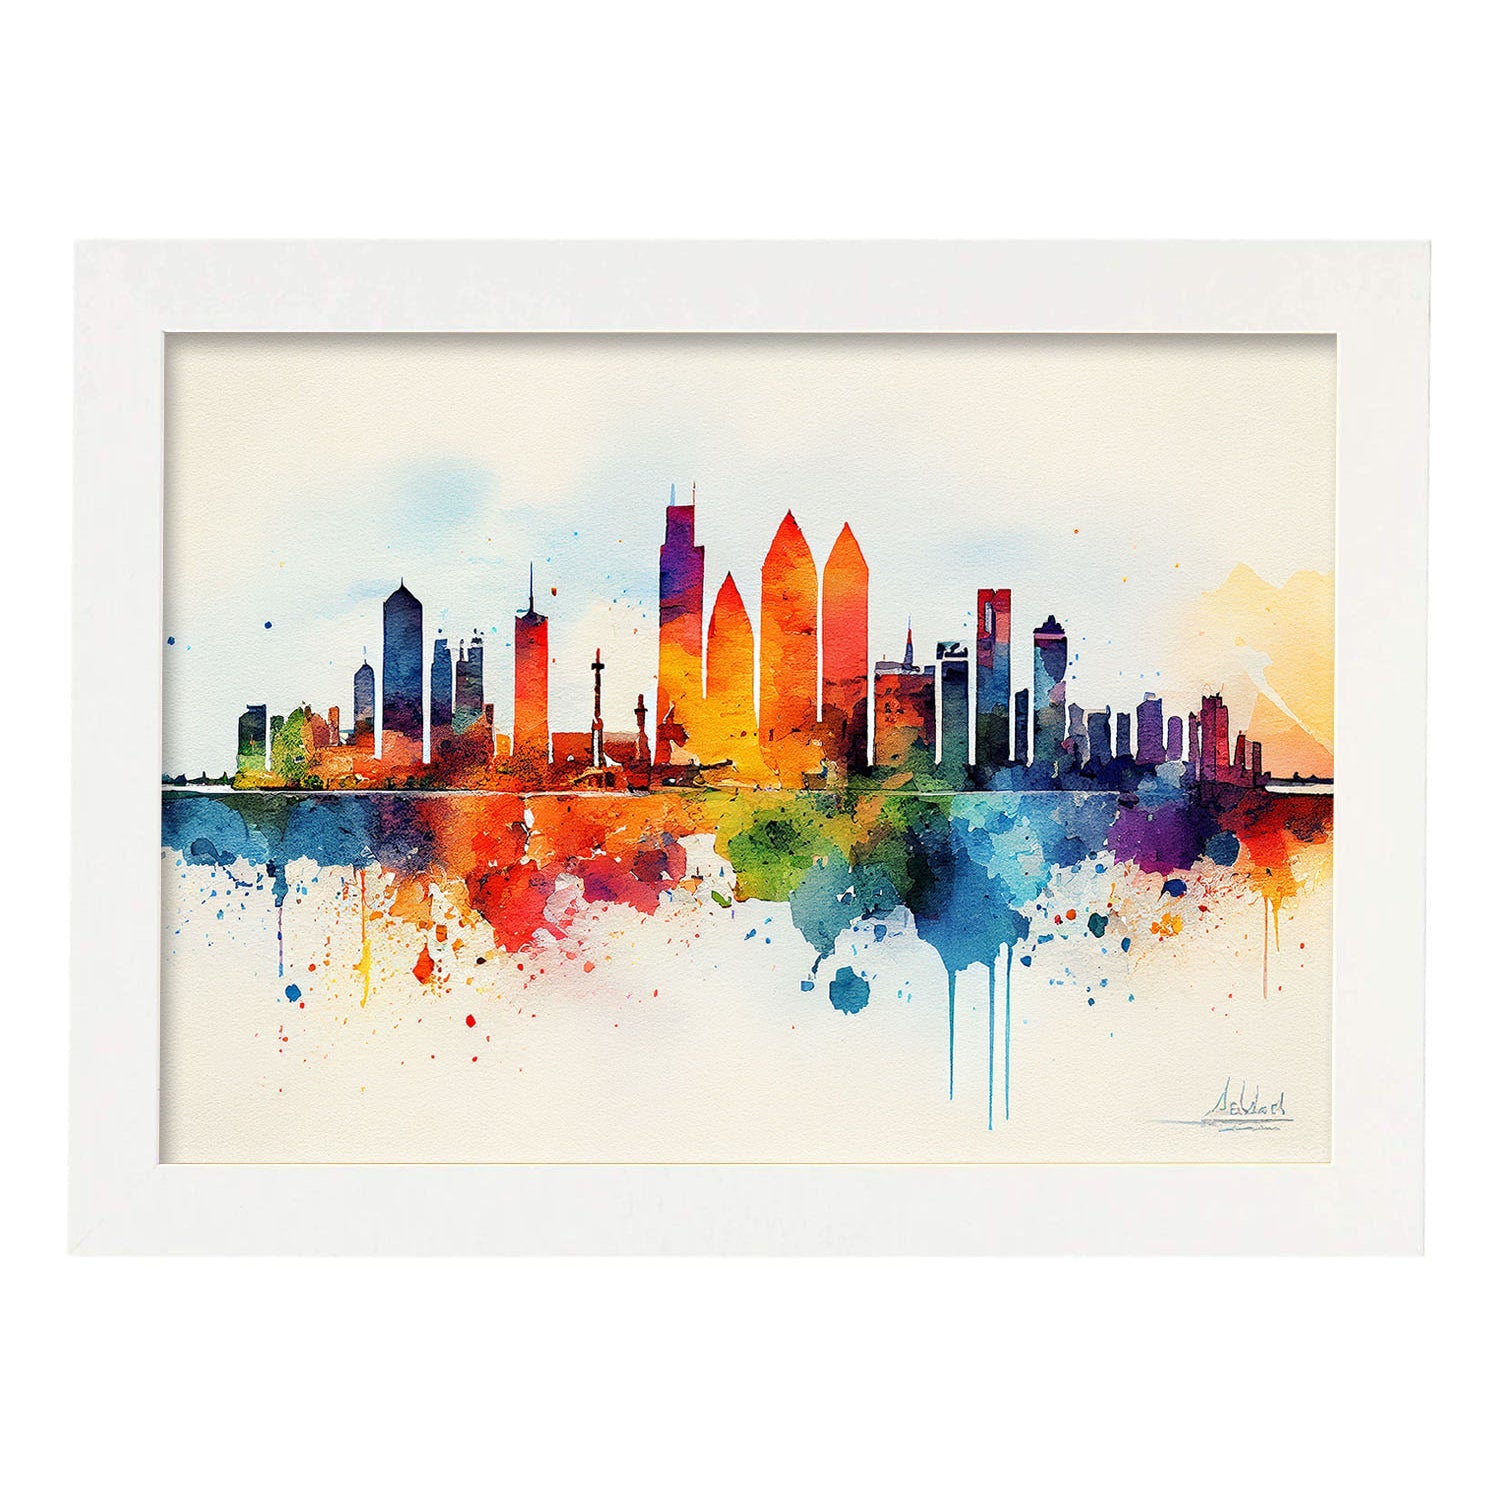 Nacnic watercolor of a skyline of the city of Abu Dhabi. Aesthetic Wall Art Prints for Bedroom or Living Room Design.-Artwork-Nacnic-A4-Marco Blanco-Nacnic Estudio SL